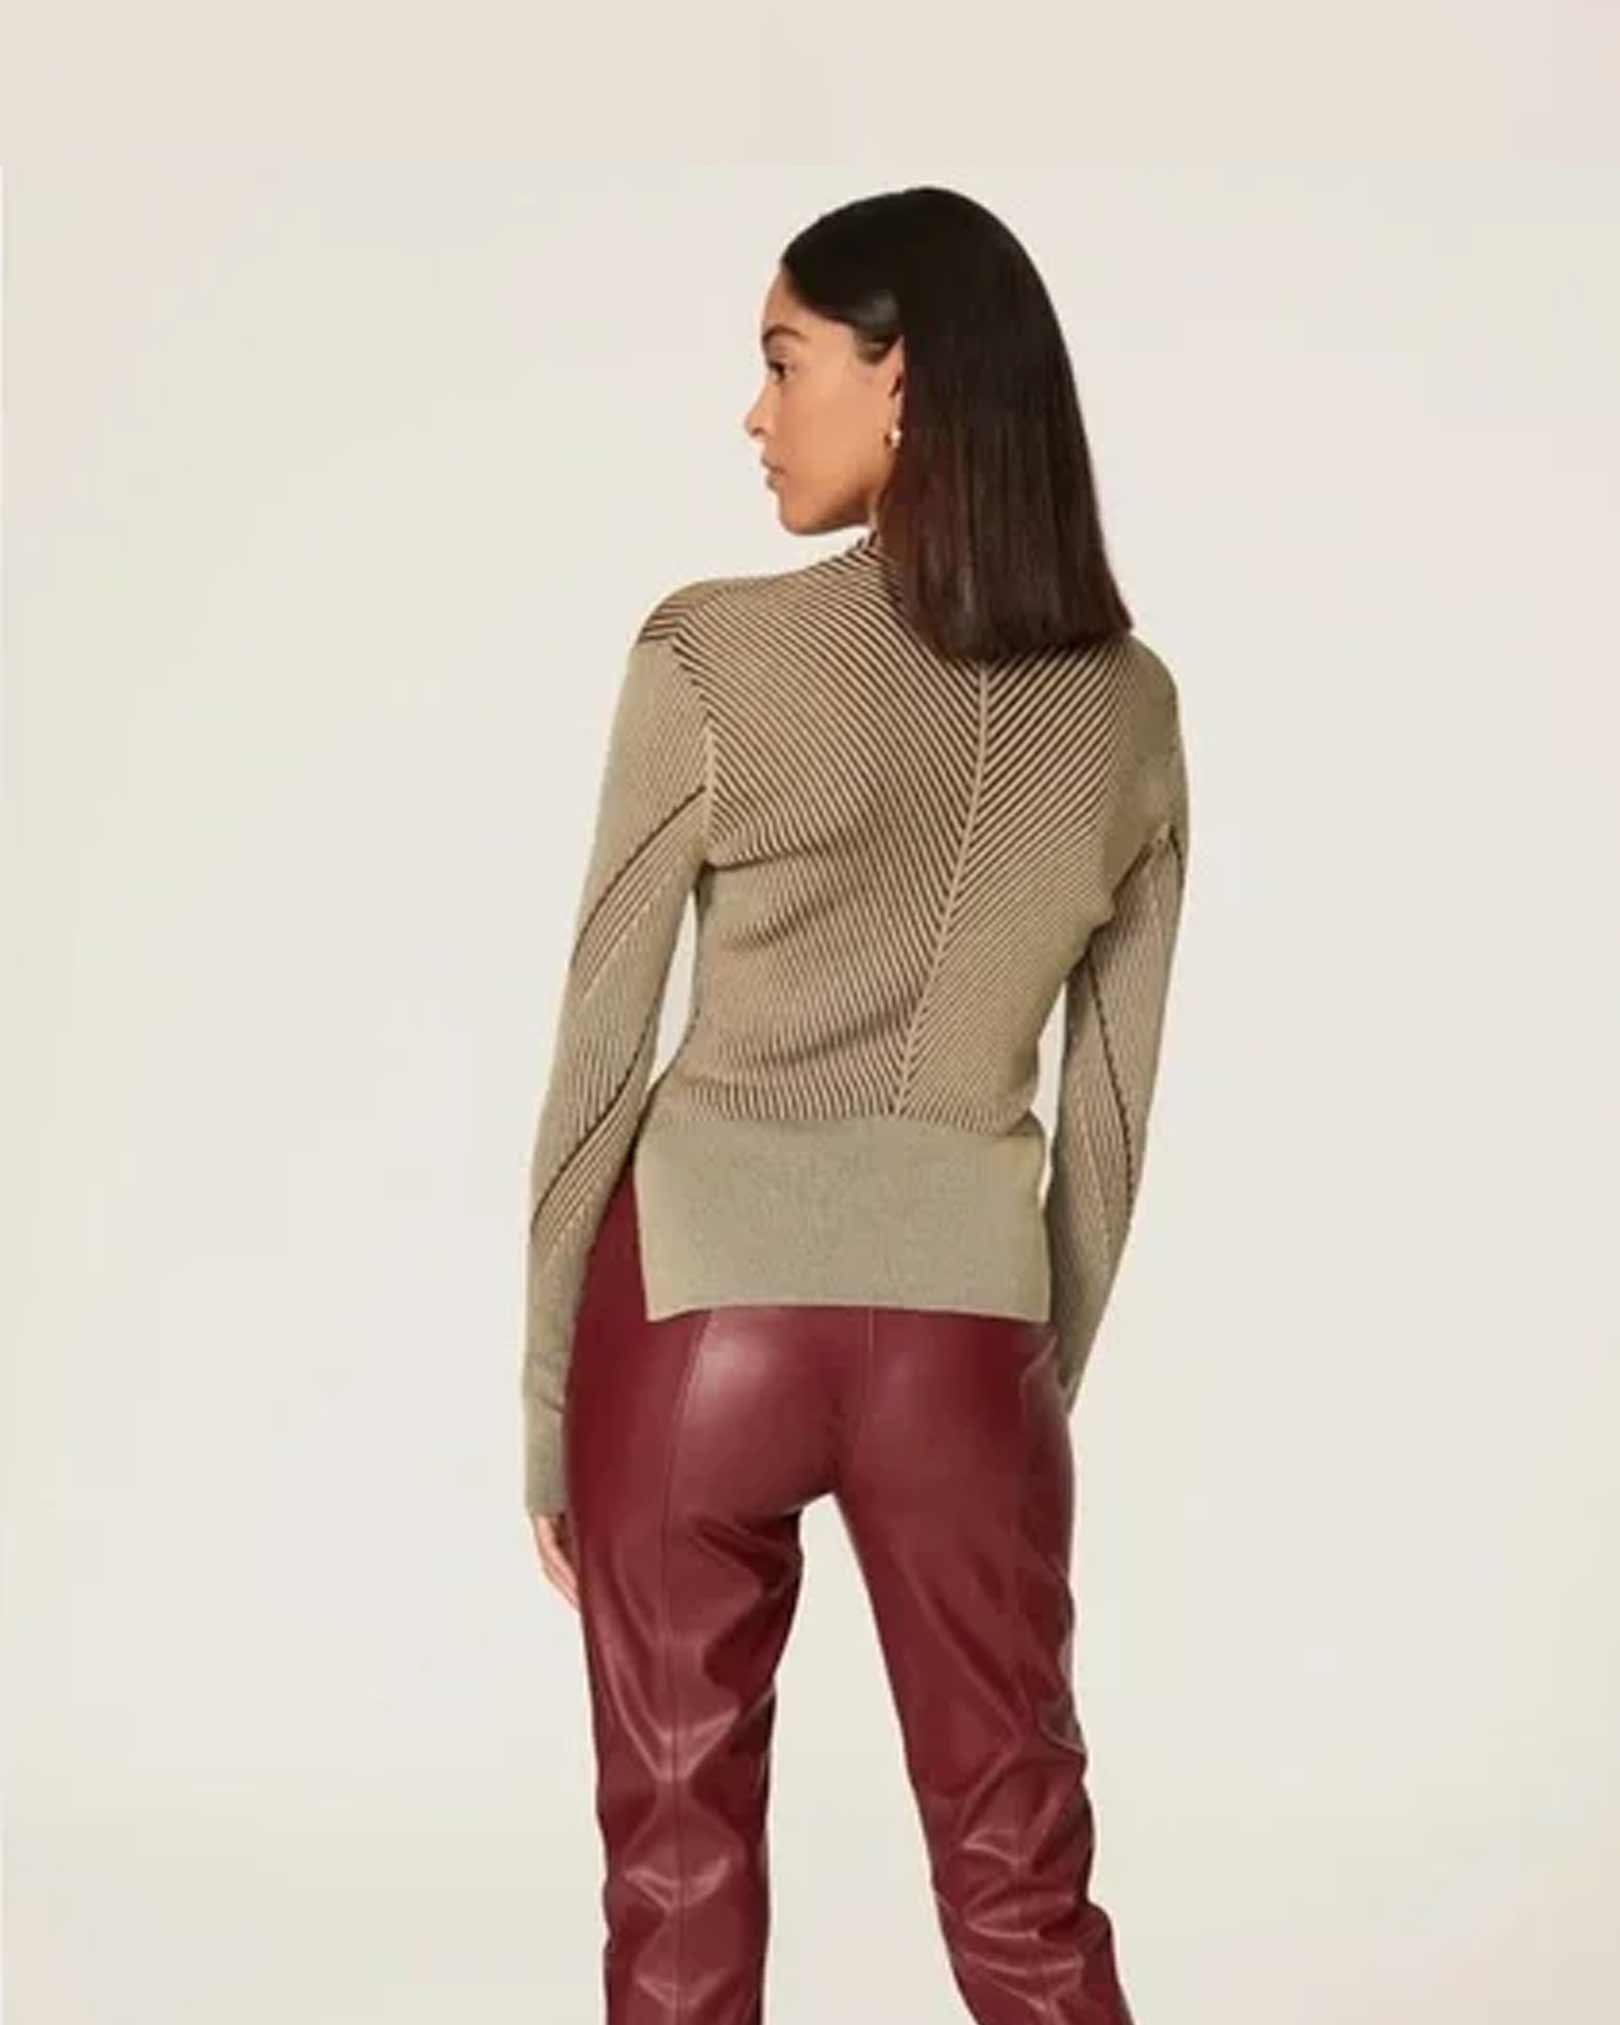 AKNVAS Two Toned Knit Top in Burgundy & Tan available at Lahn.shop